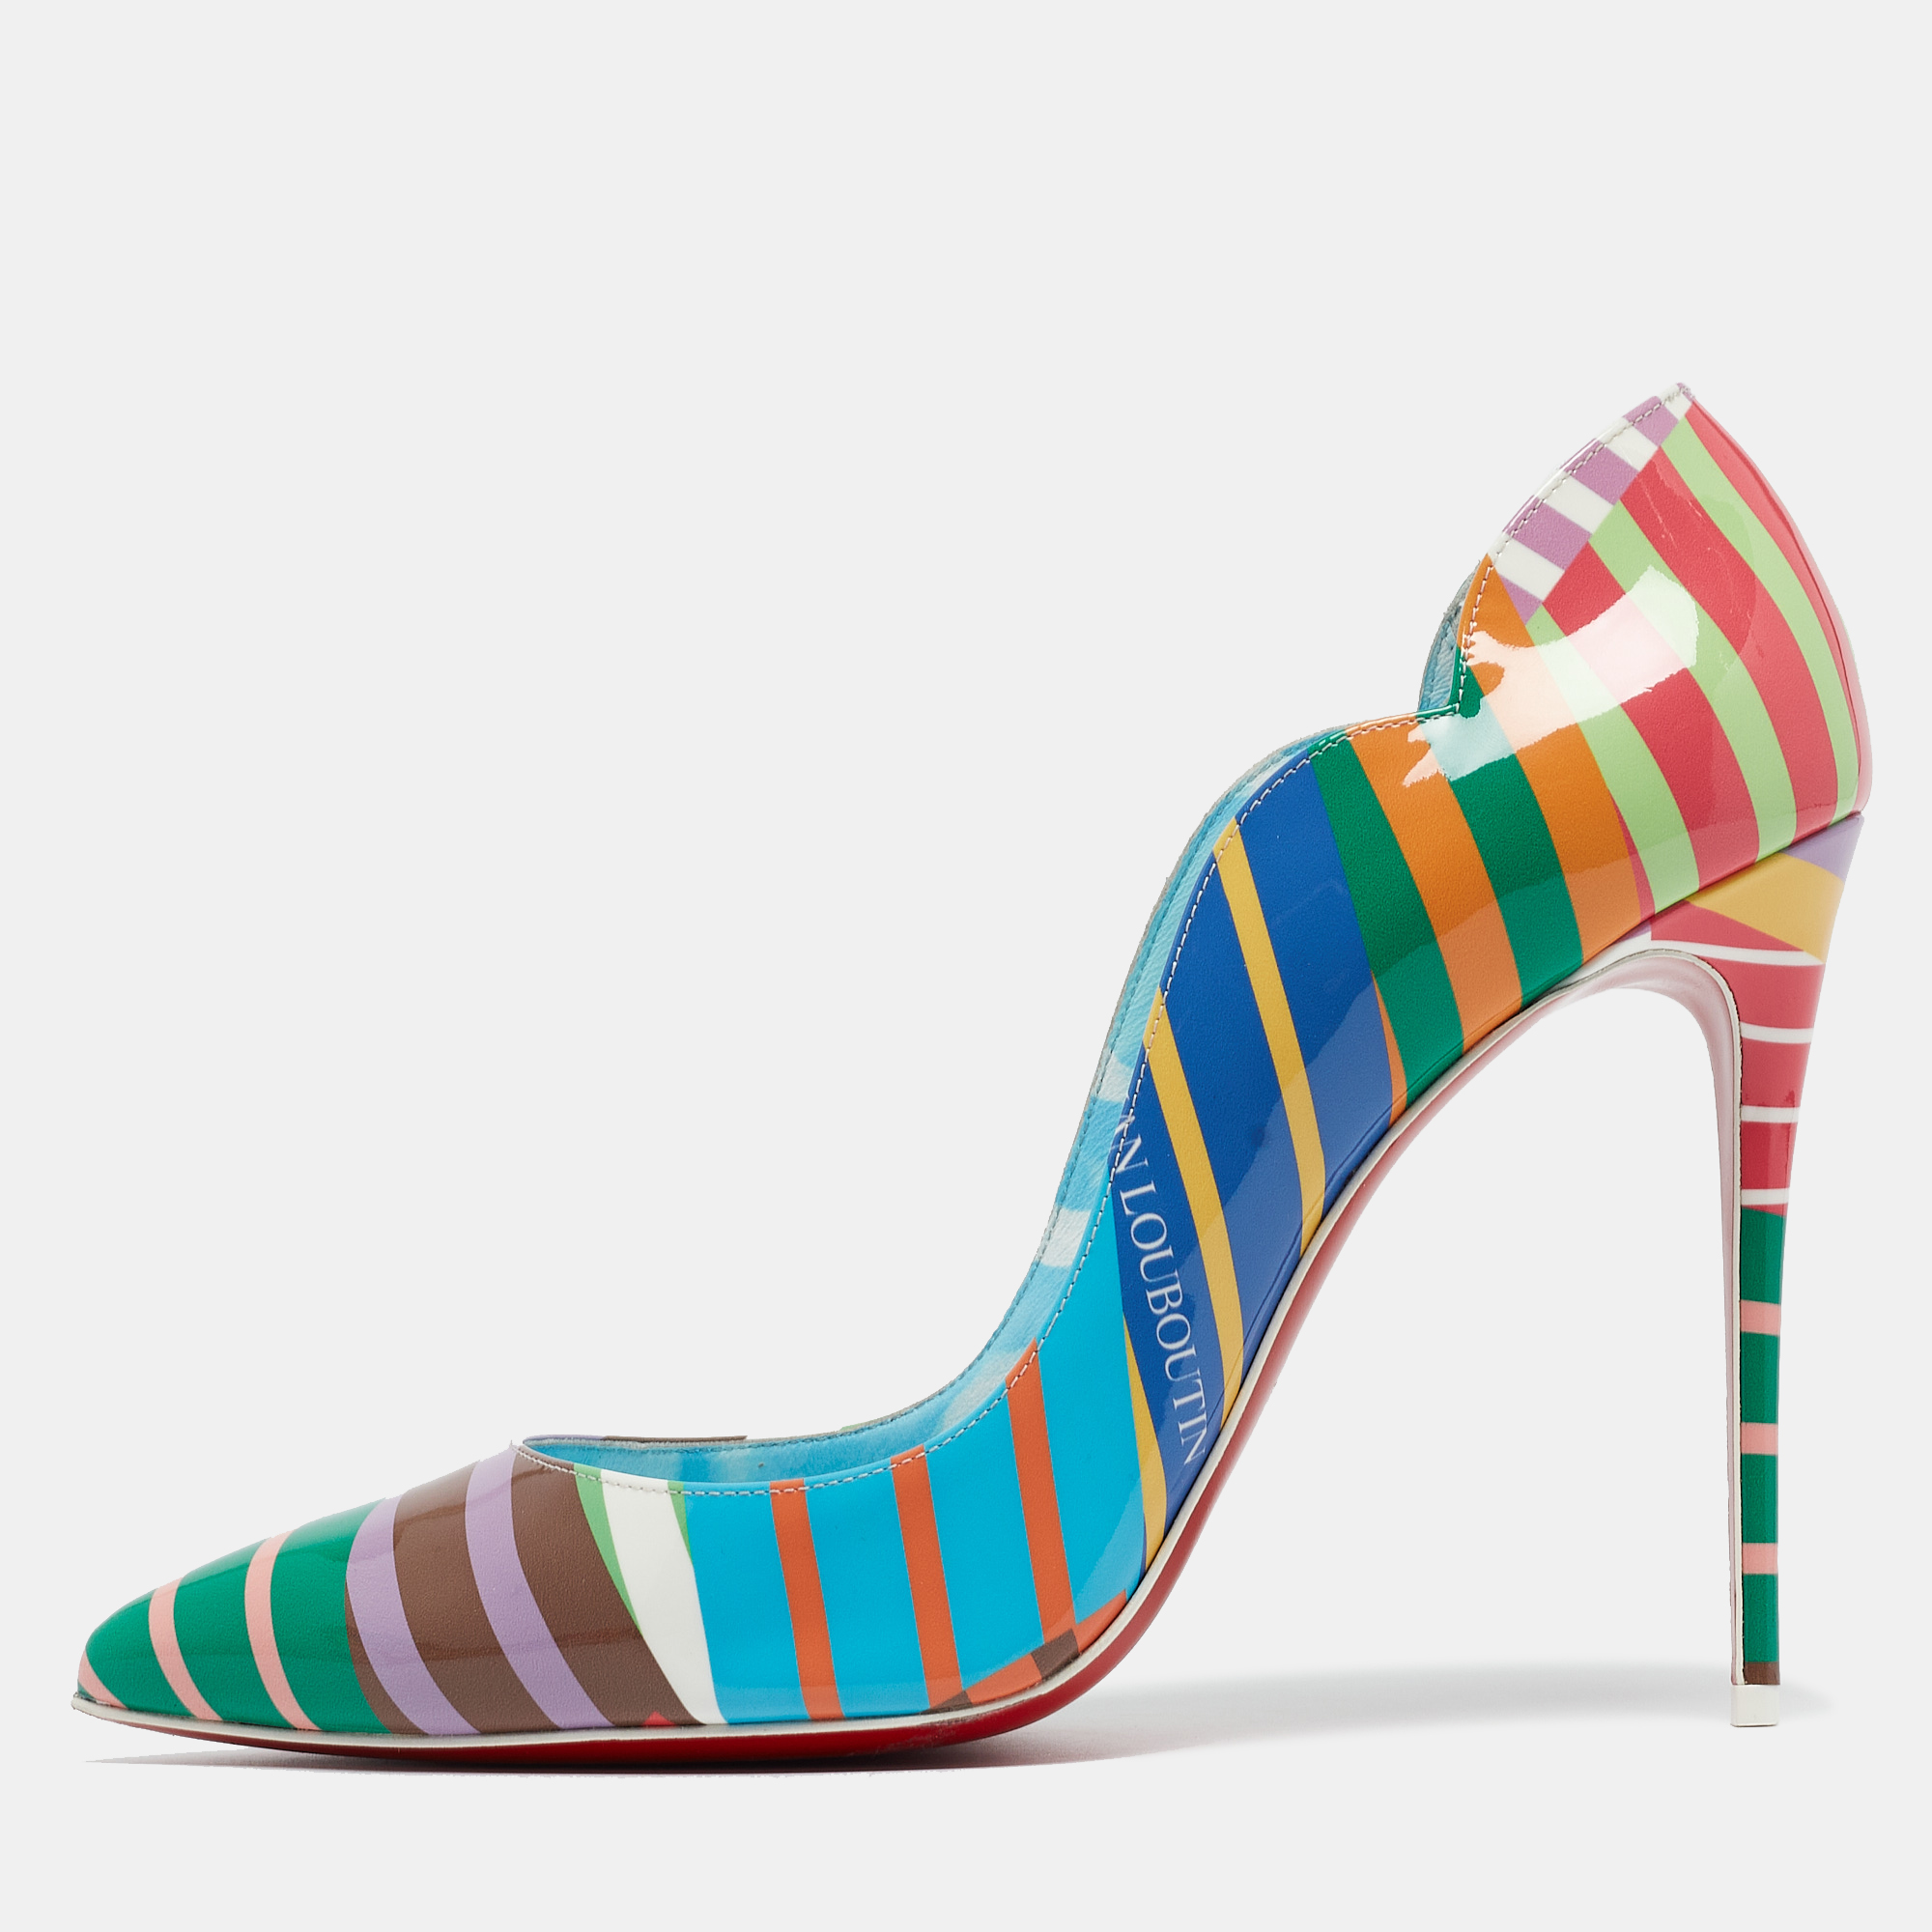 

Christian Louboutin Multicolor Printed Patent Leather Hot Chick Pumps Size